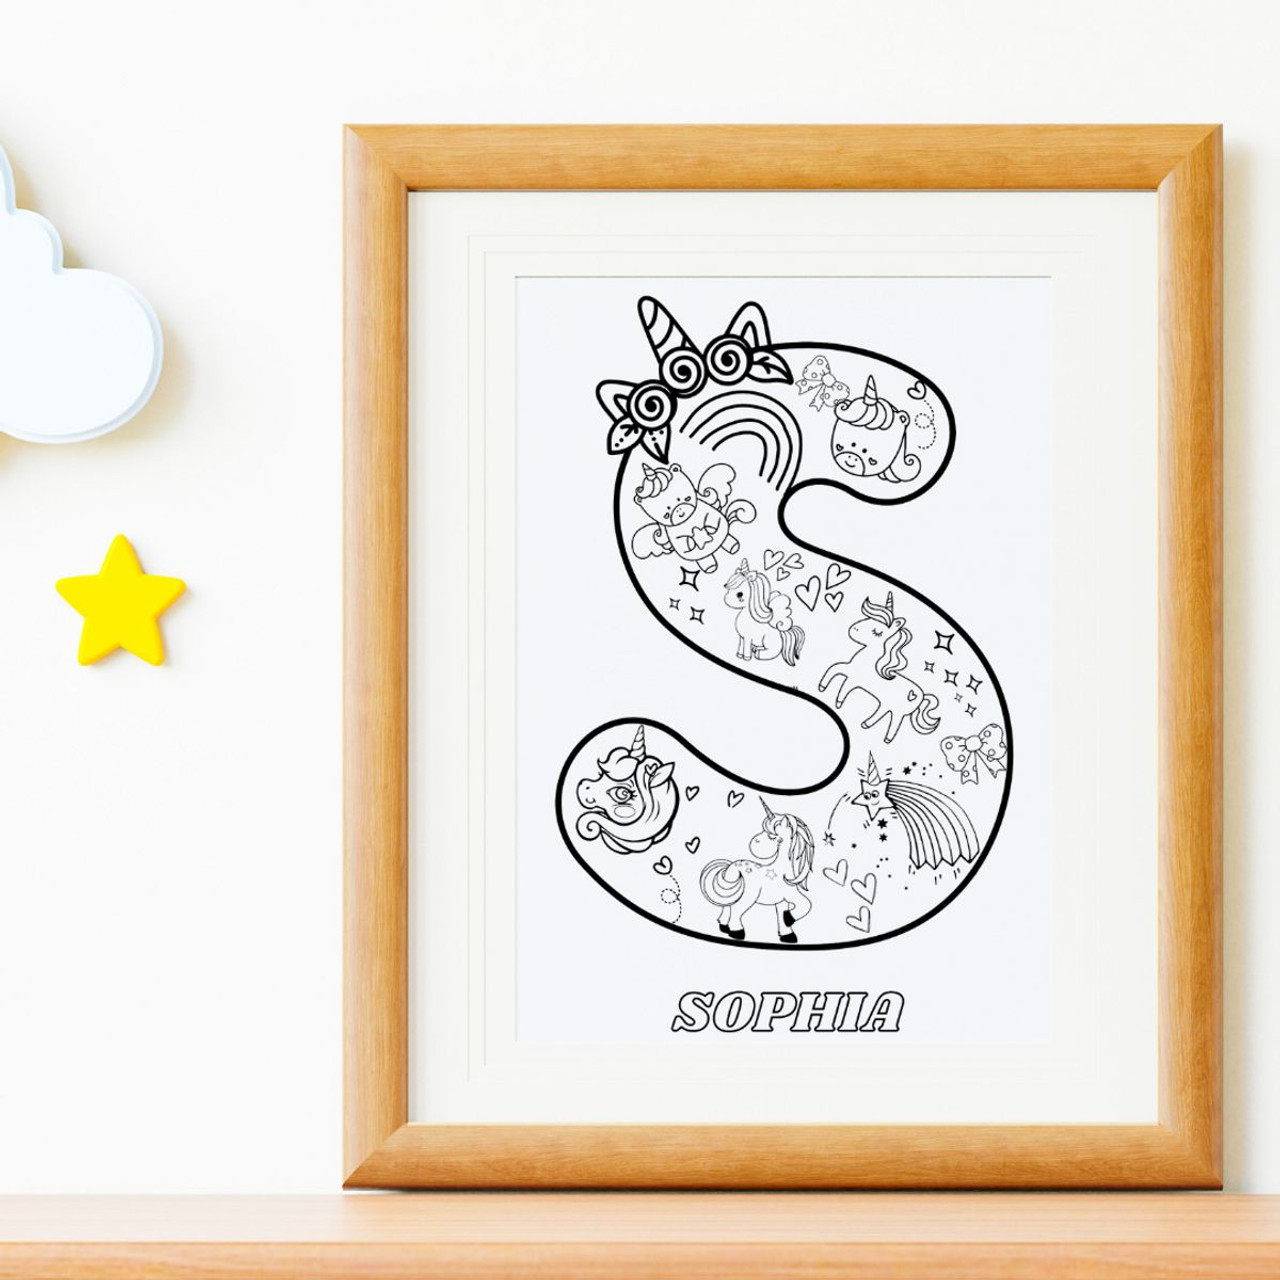 Personalized Kids' Name Coloring Poster product image